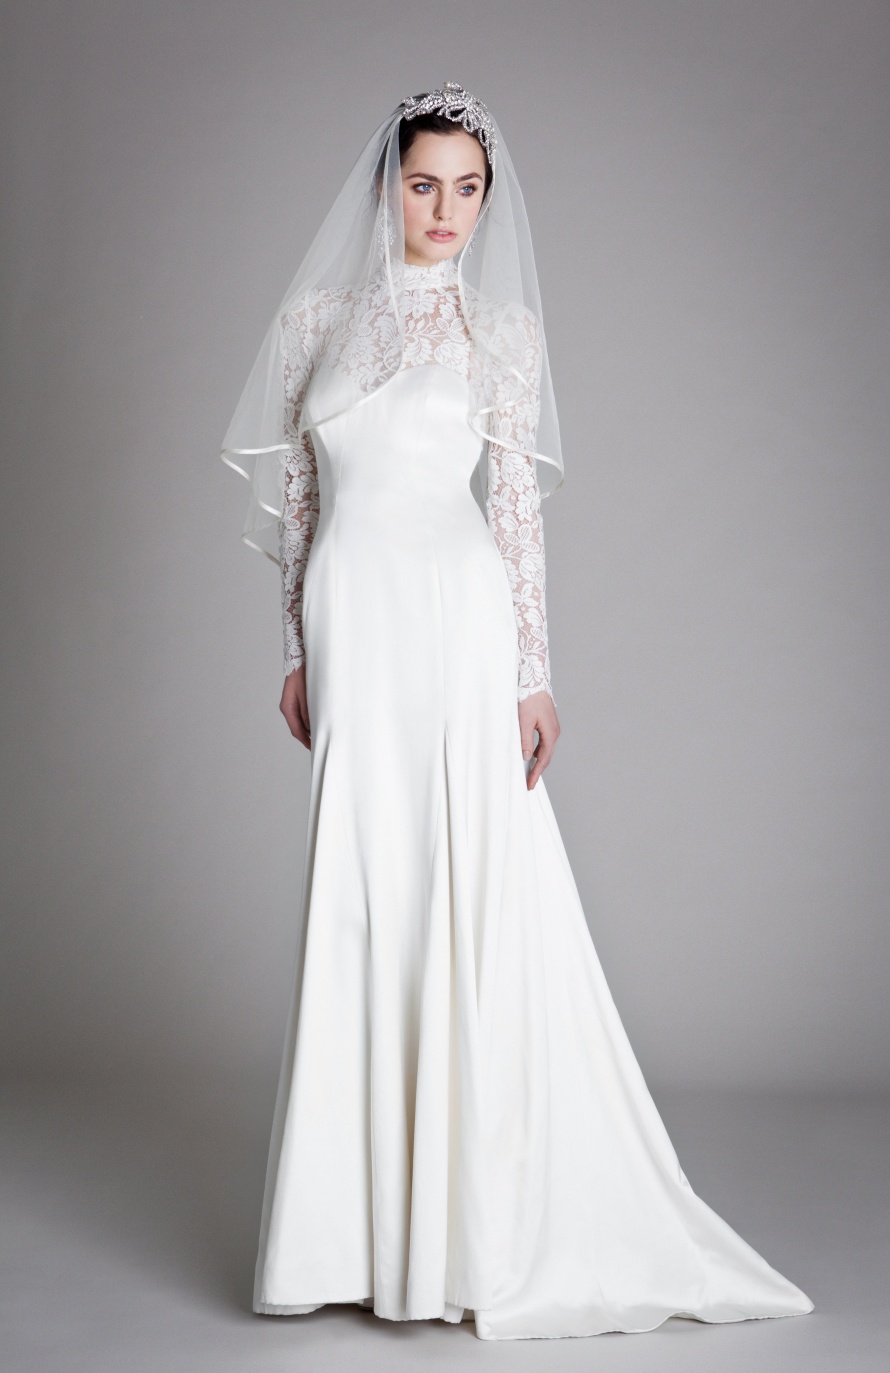 Are you going to be a fall bride? Well